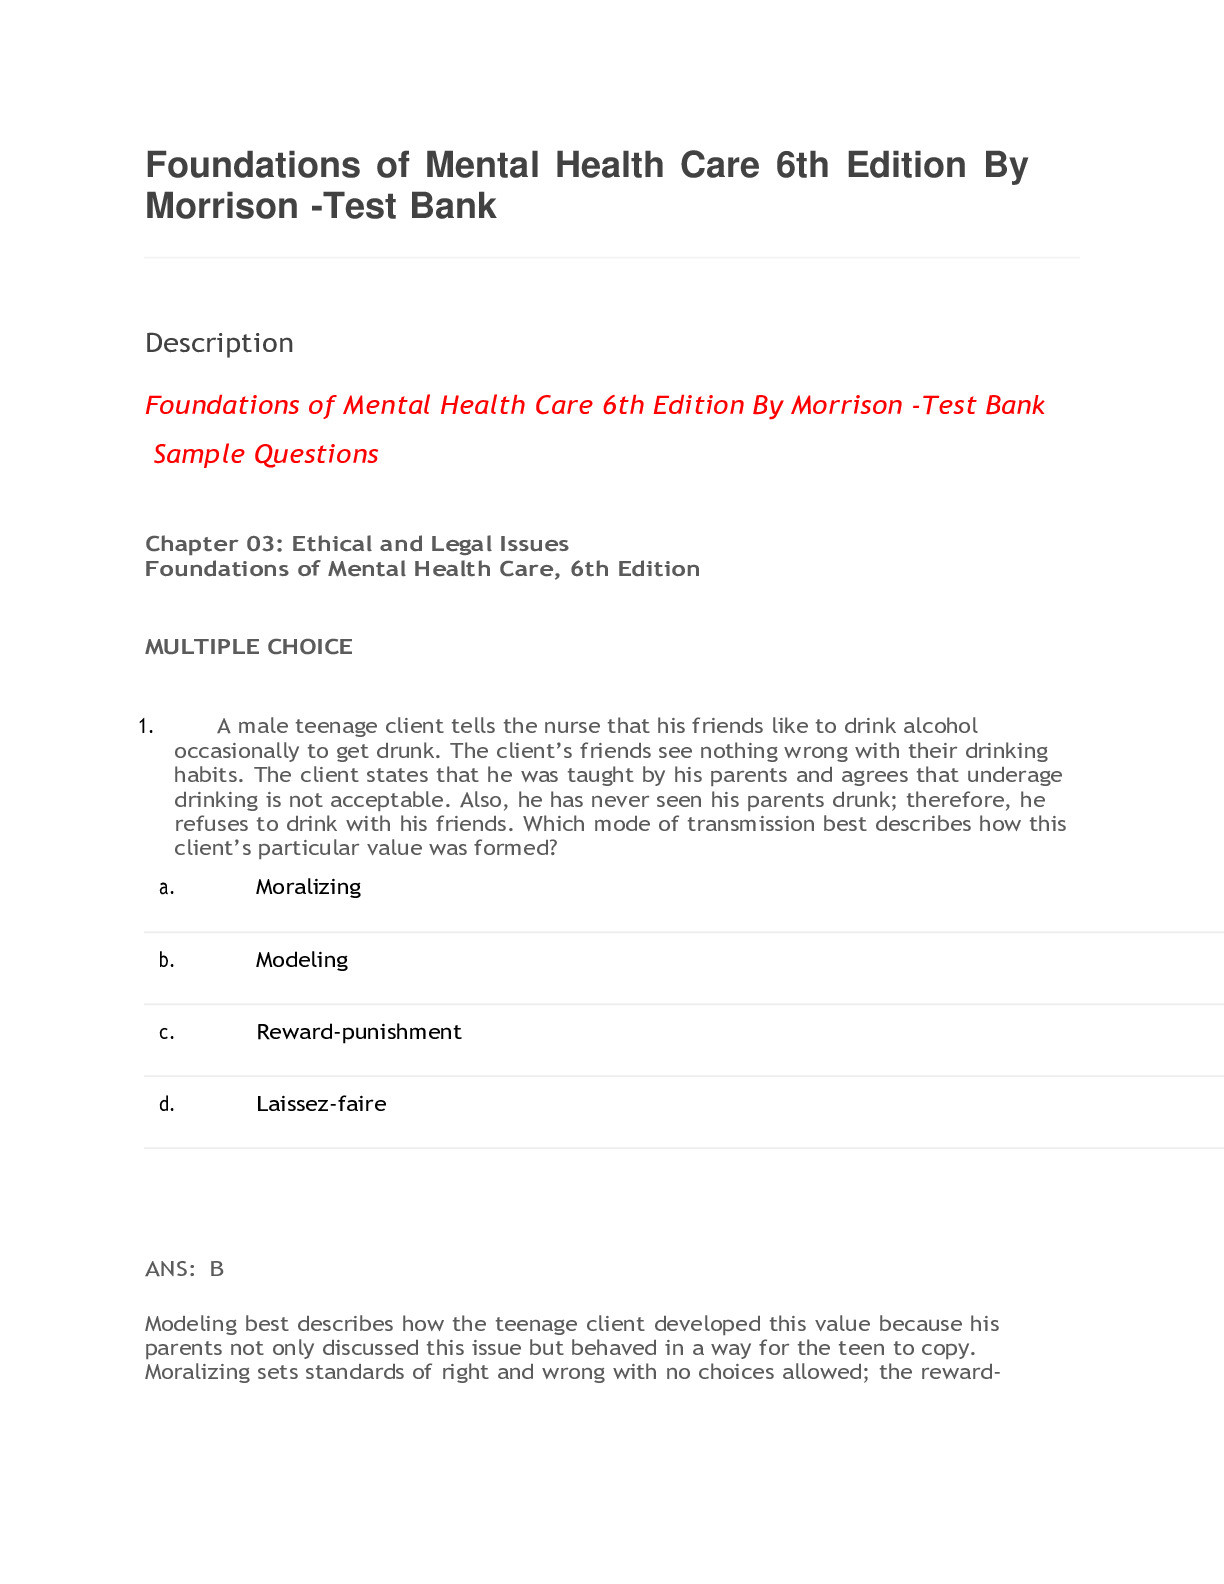 Foundations of Mental Health Care 6th Edition By Morrison -Test Bank